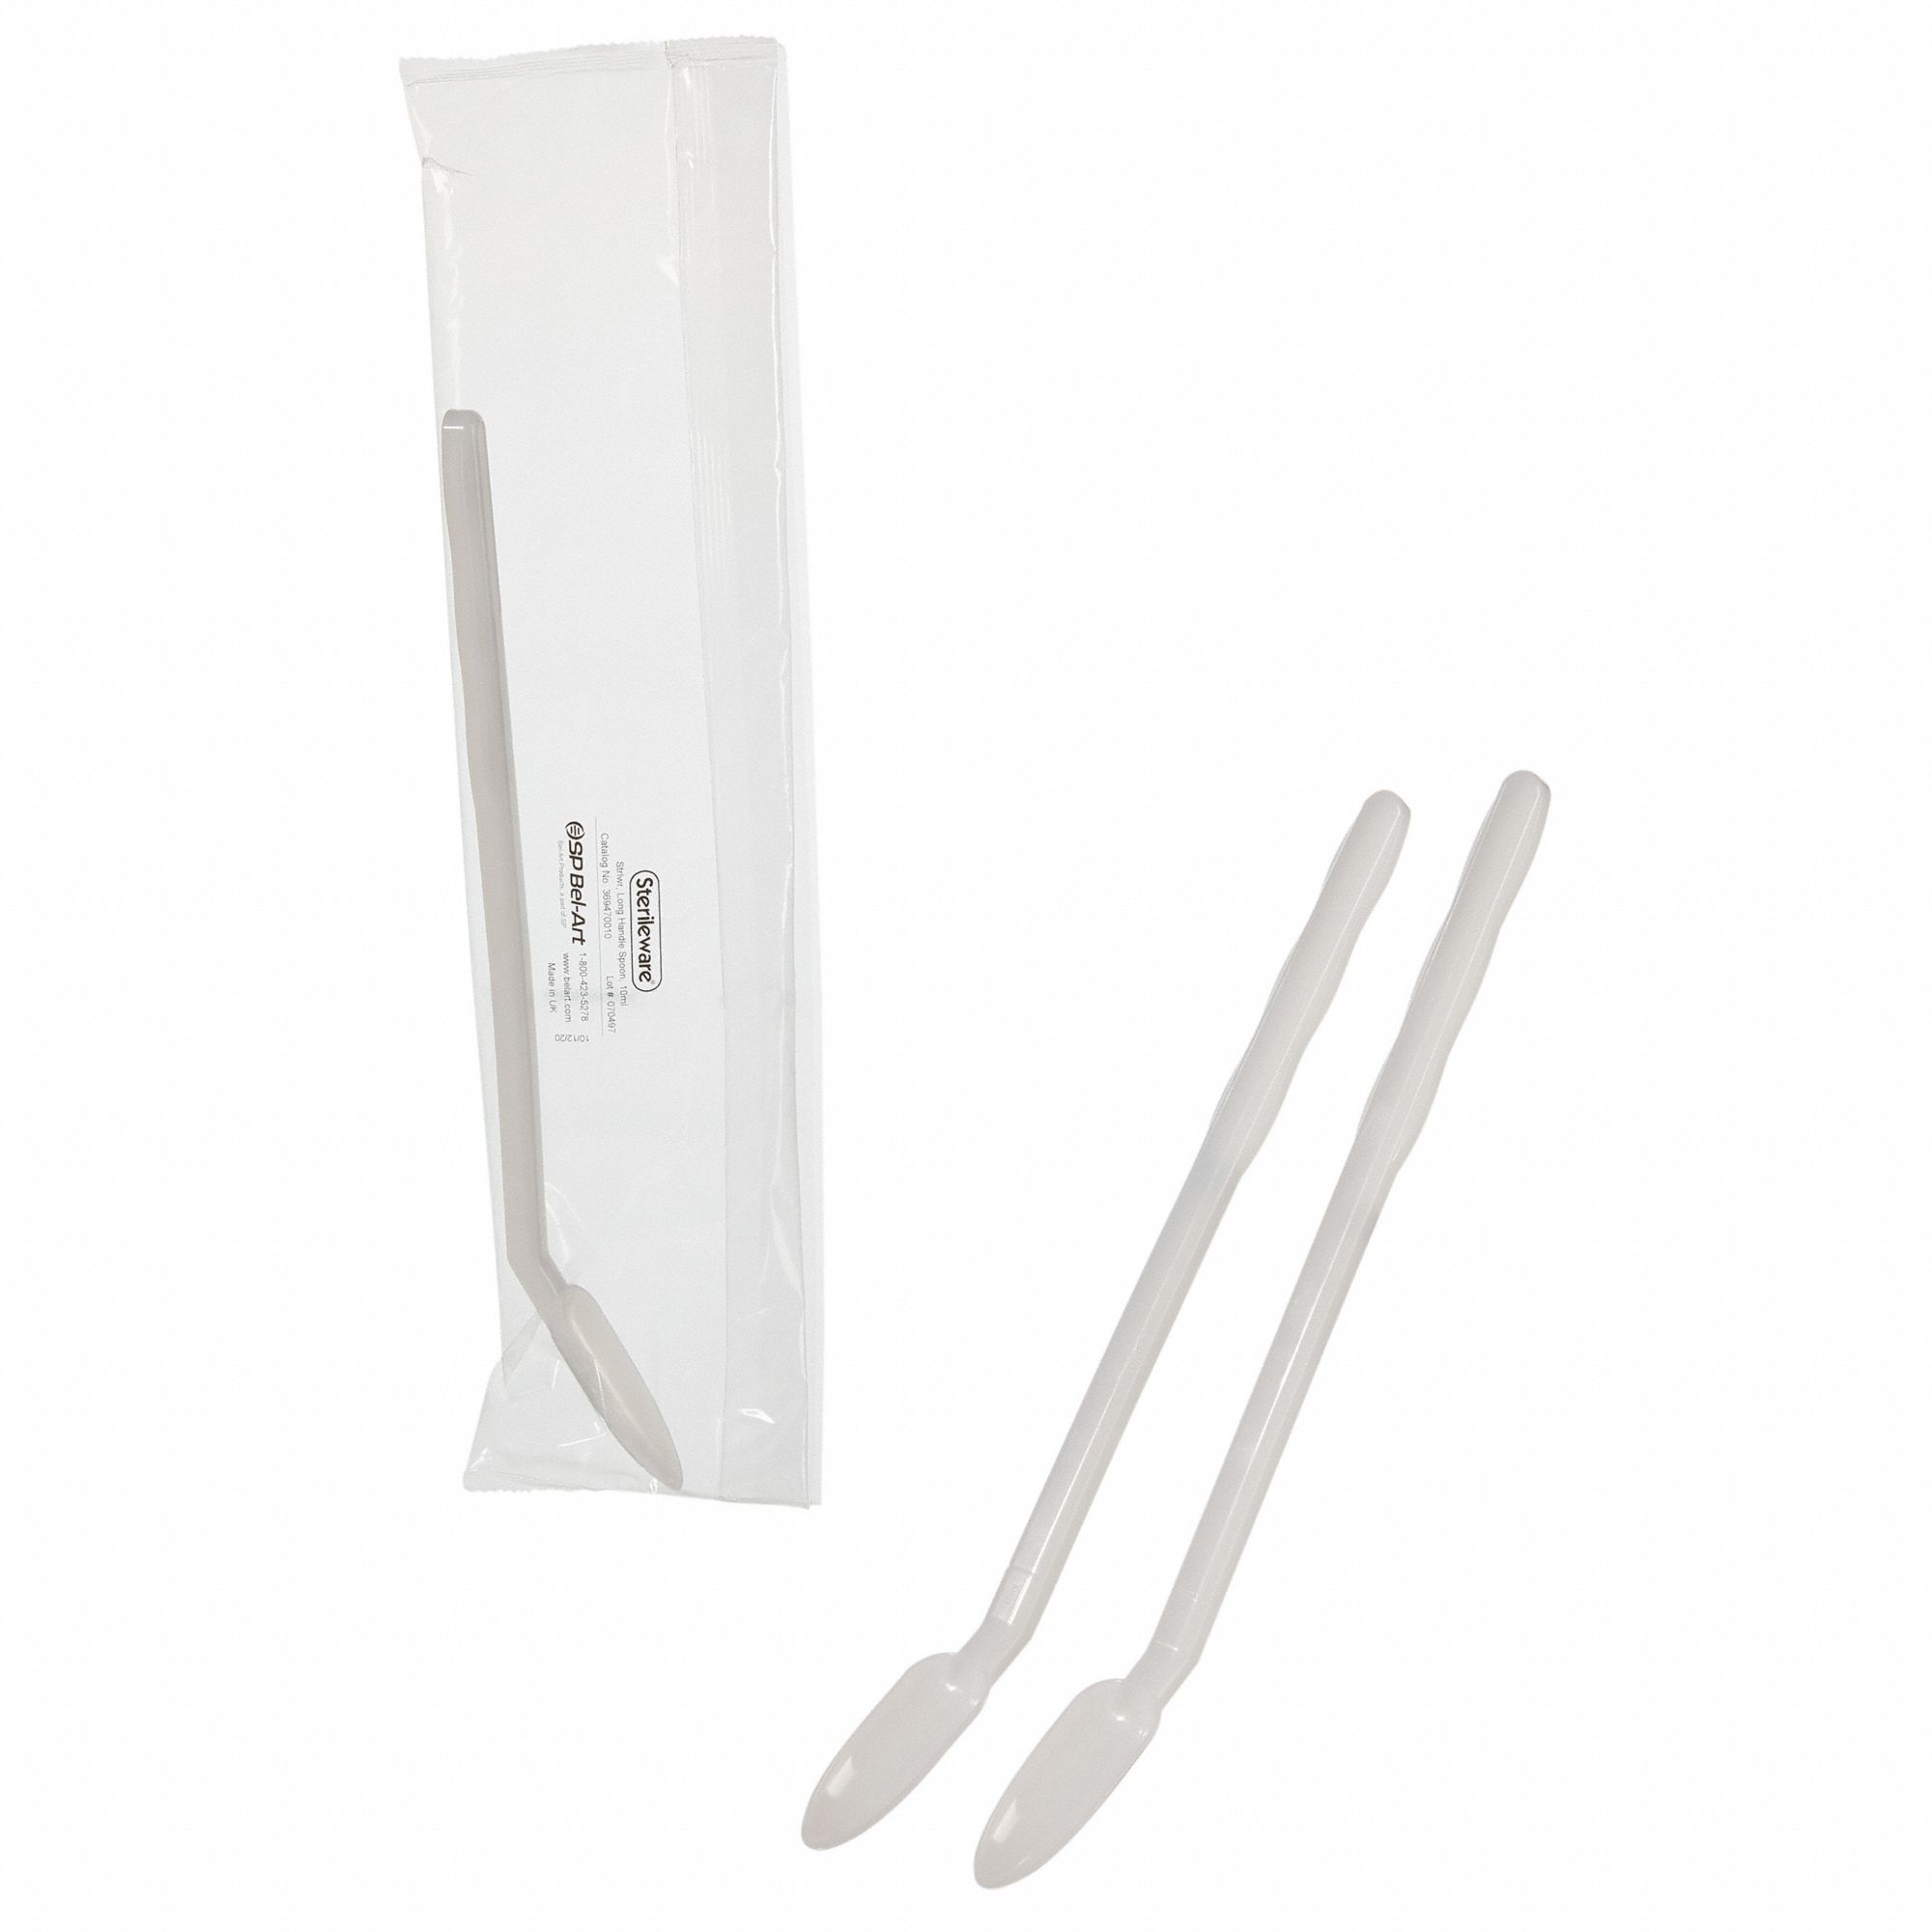 Sterile Long Handle Spoon: 20 mL/3/4 oz, 30.48 cm_12 in Overall Lg, 100 PK